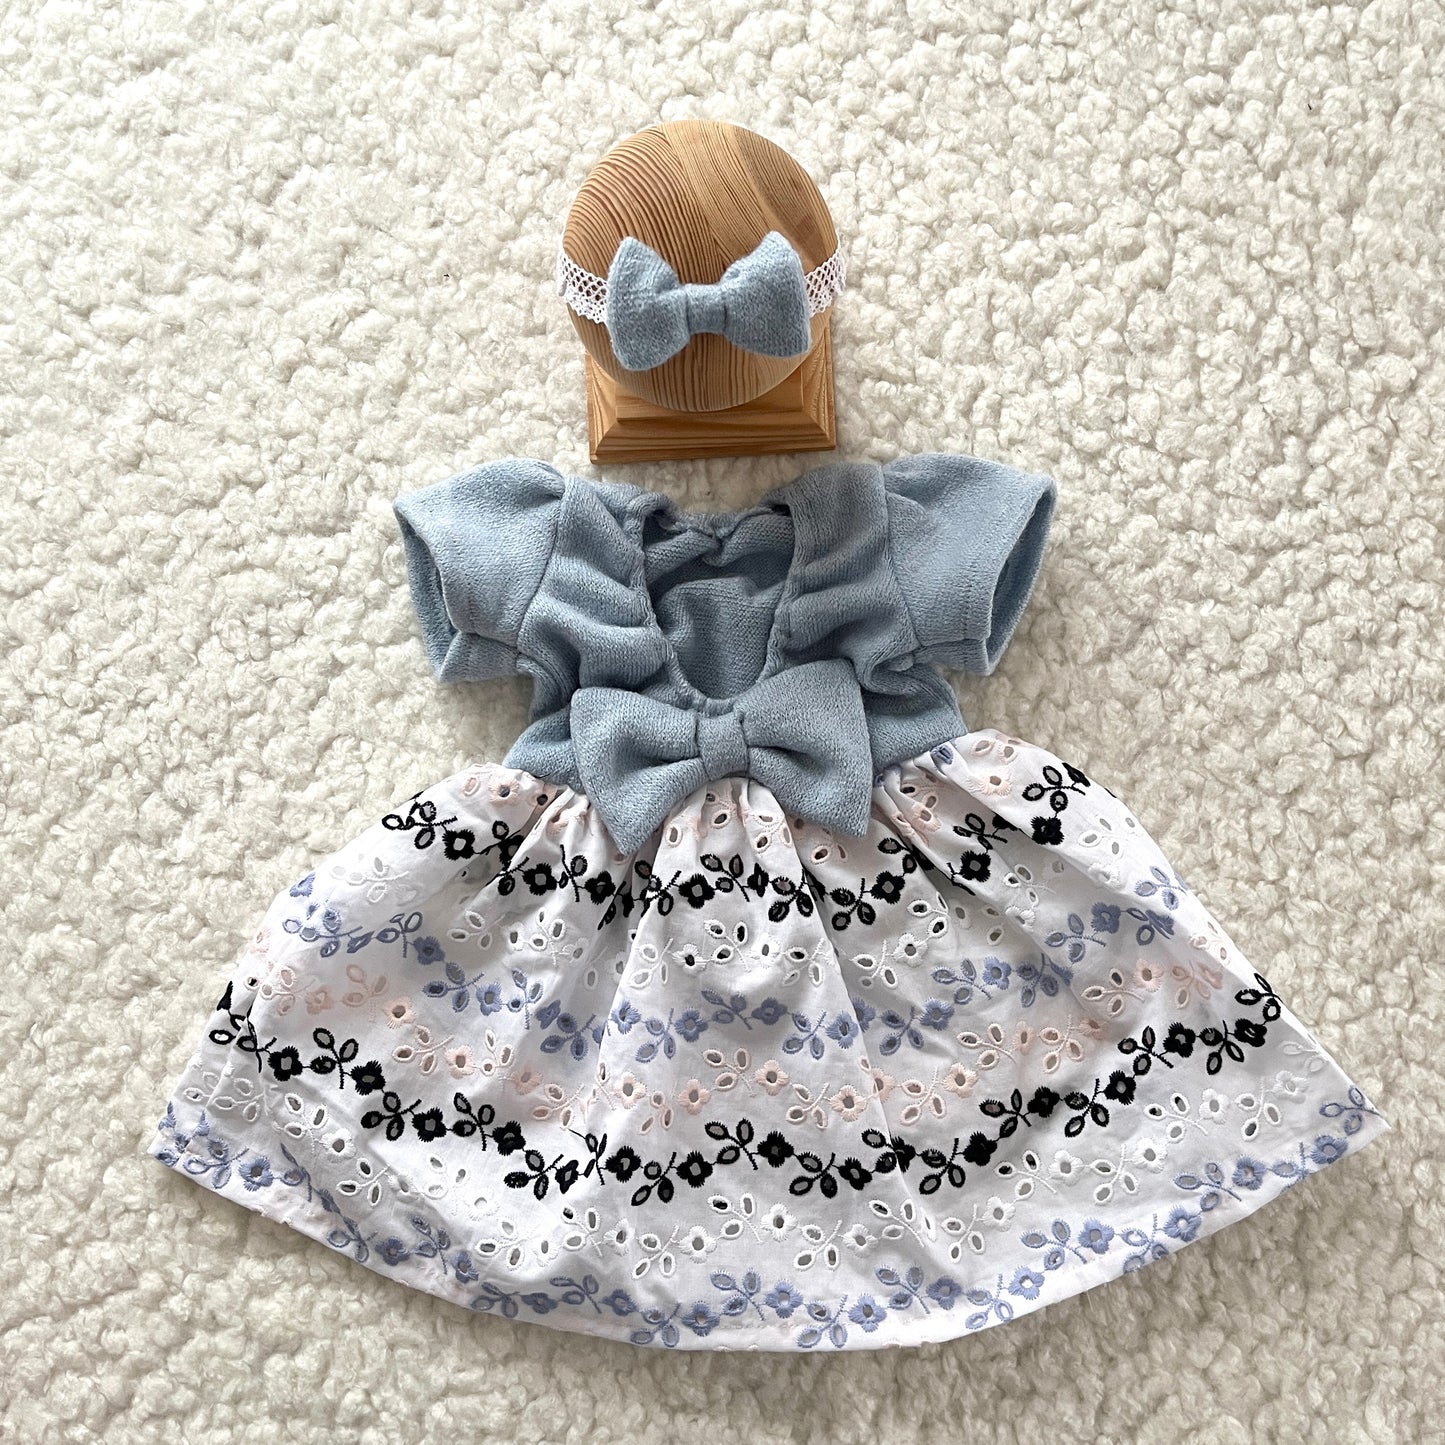 Eva blue black and blue  Newborn Photography Prop Outfit For Girl